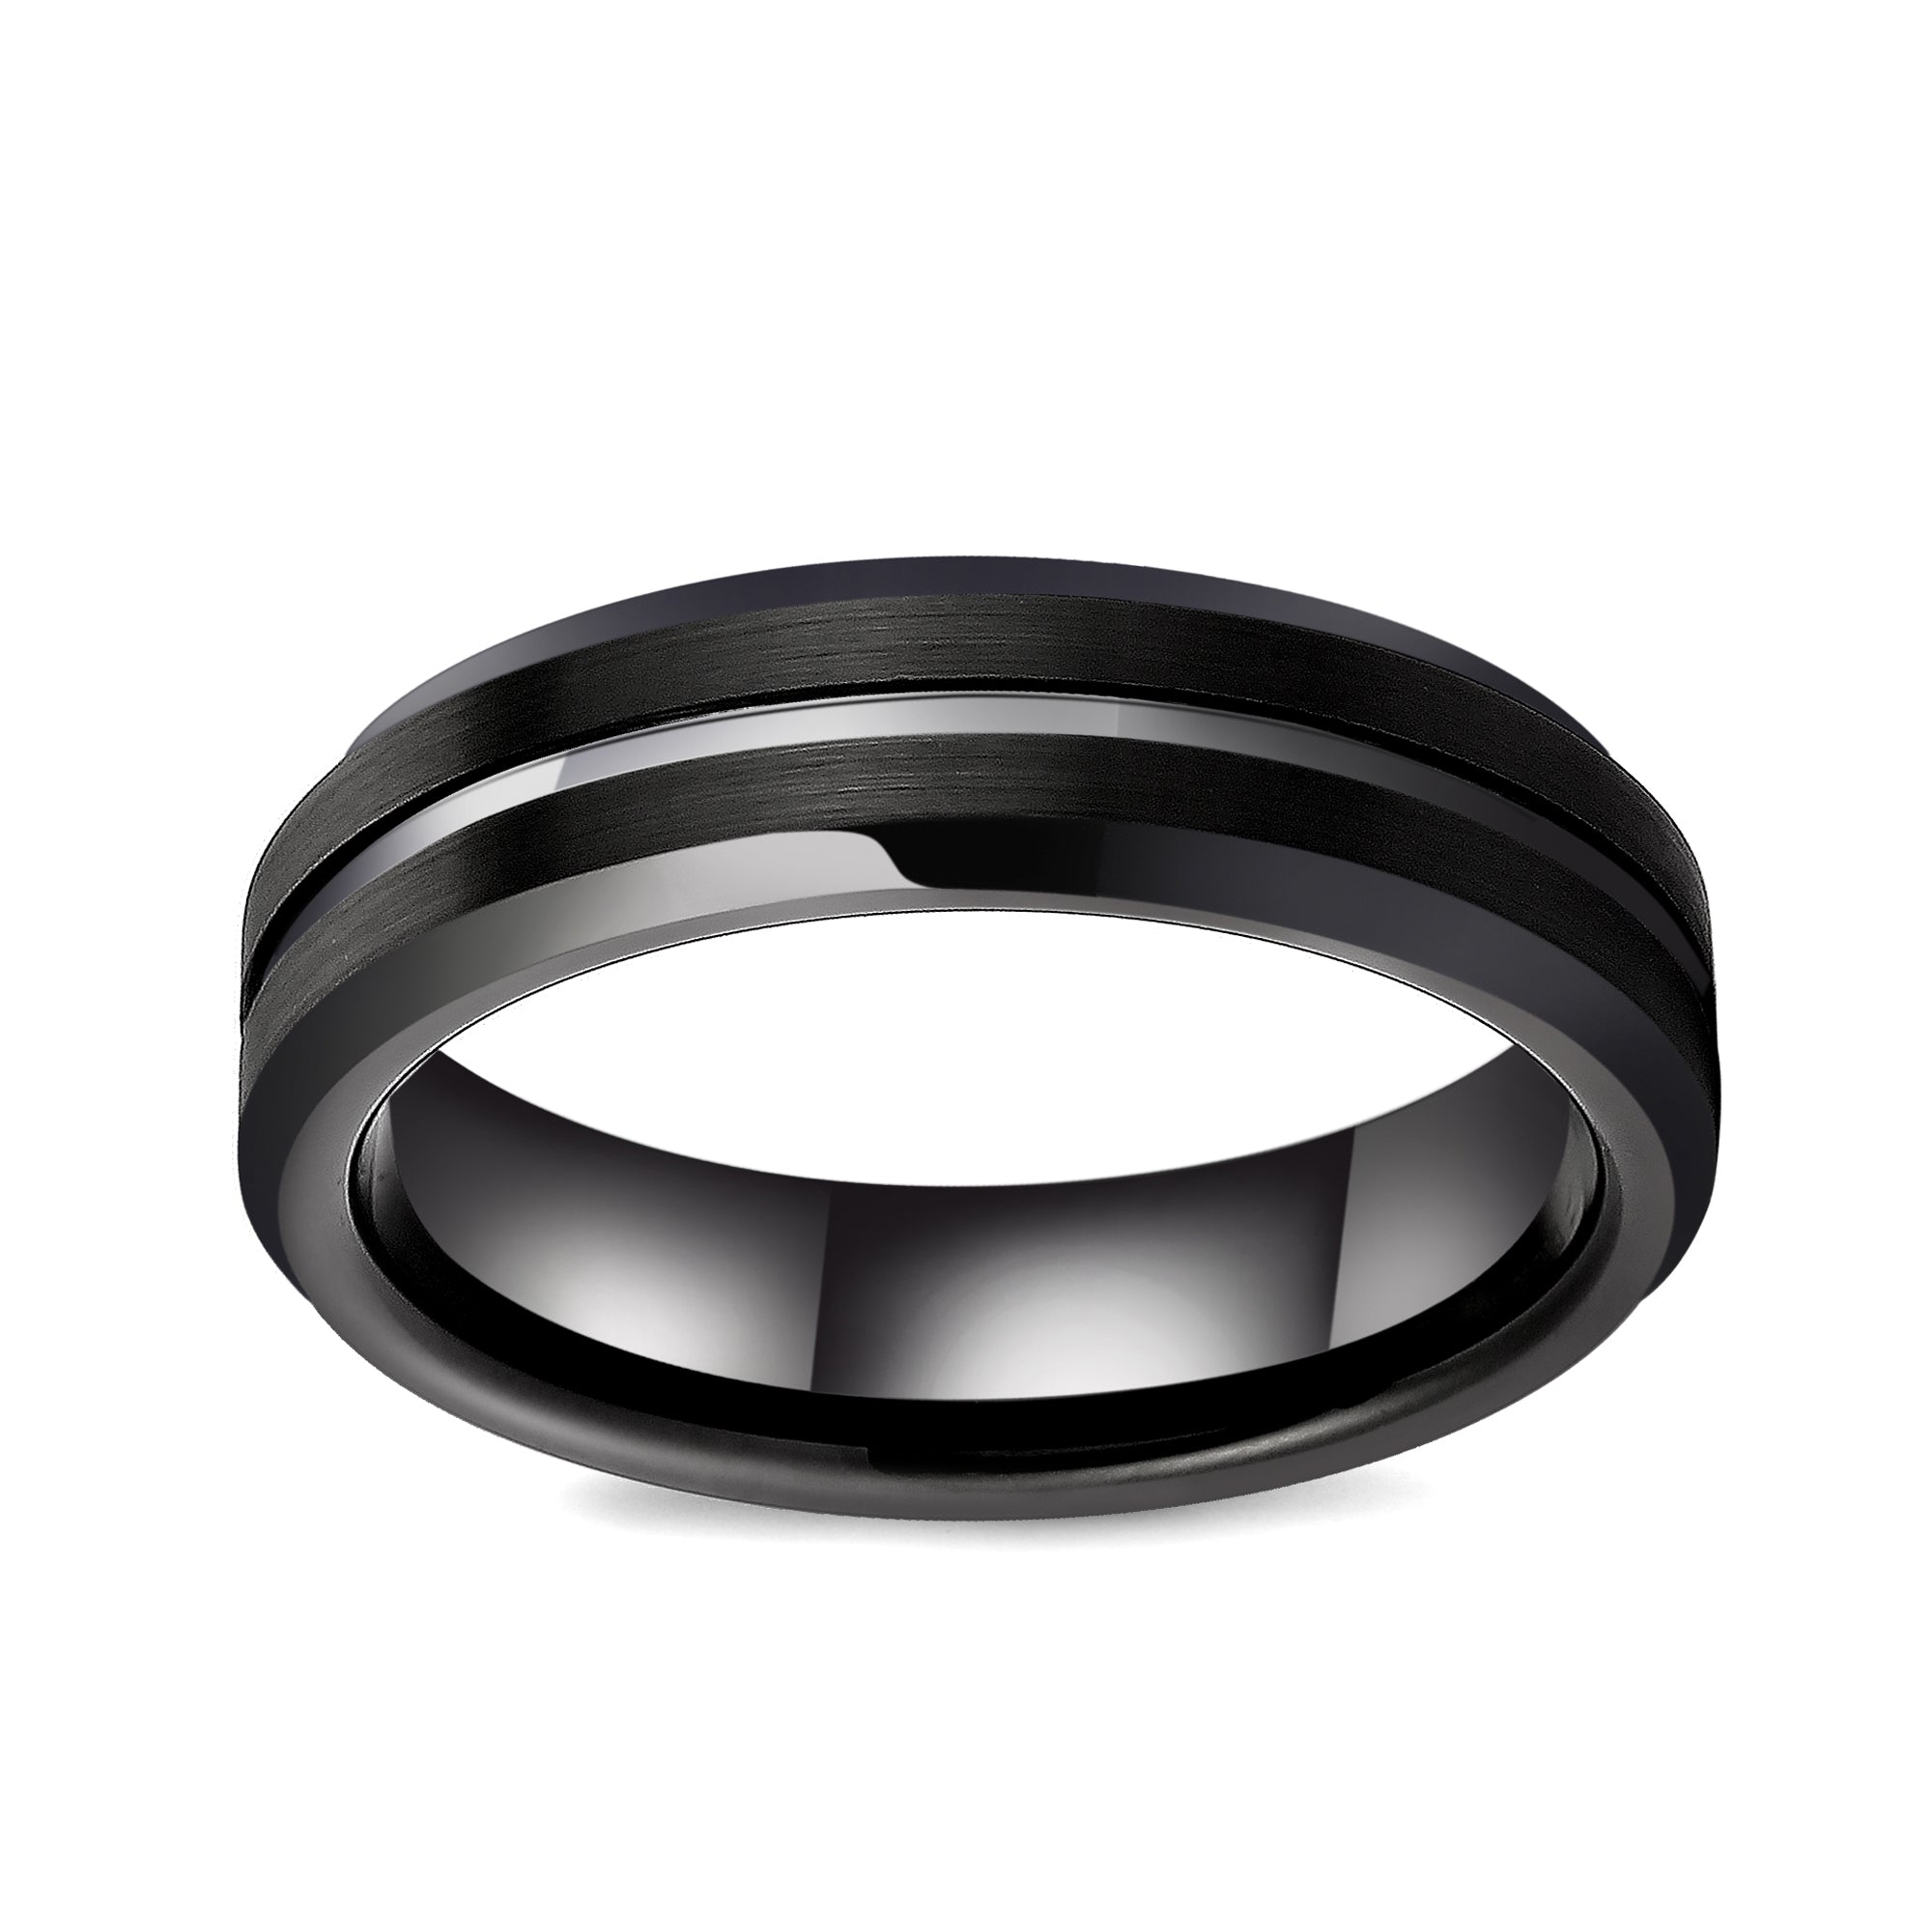 Black Tungsten Carbide Ring with Groove, Polished Beveled Edge, 6MM